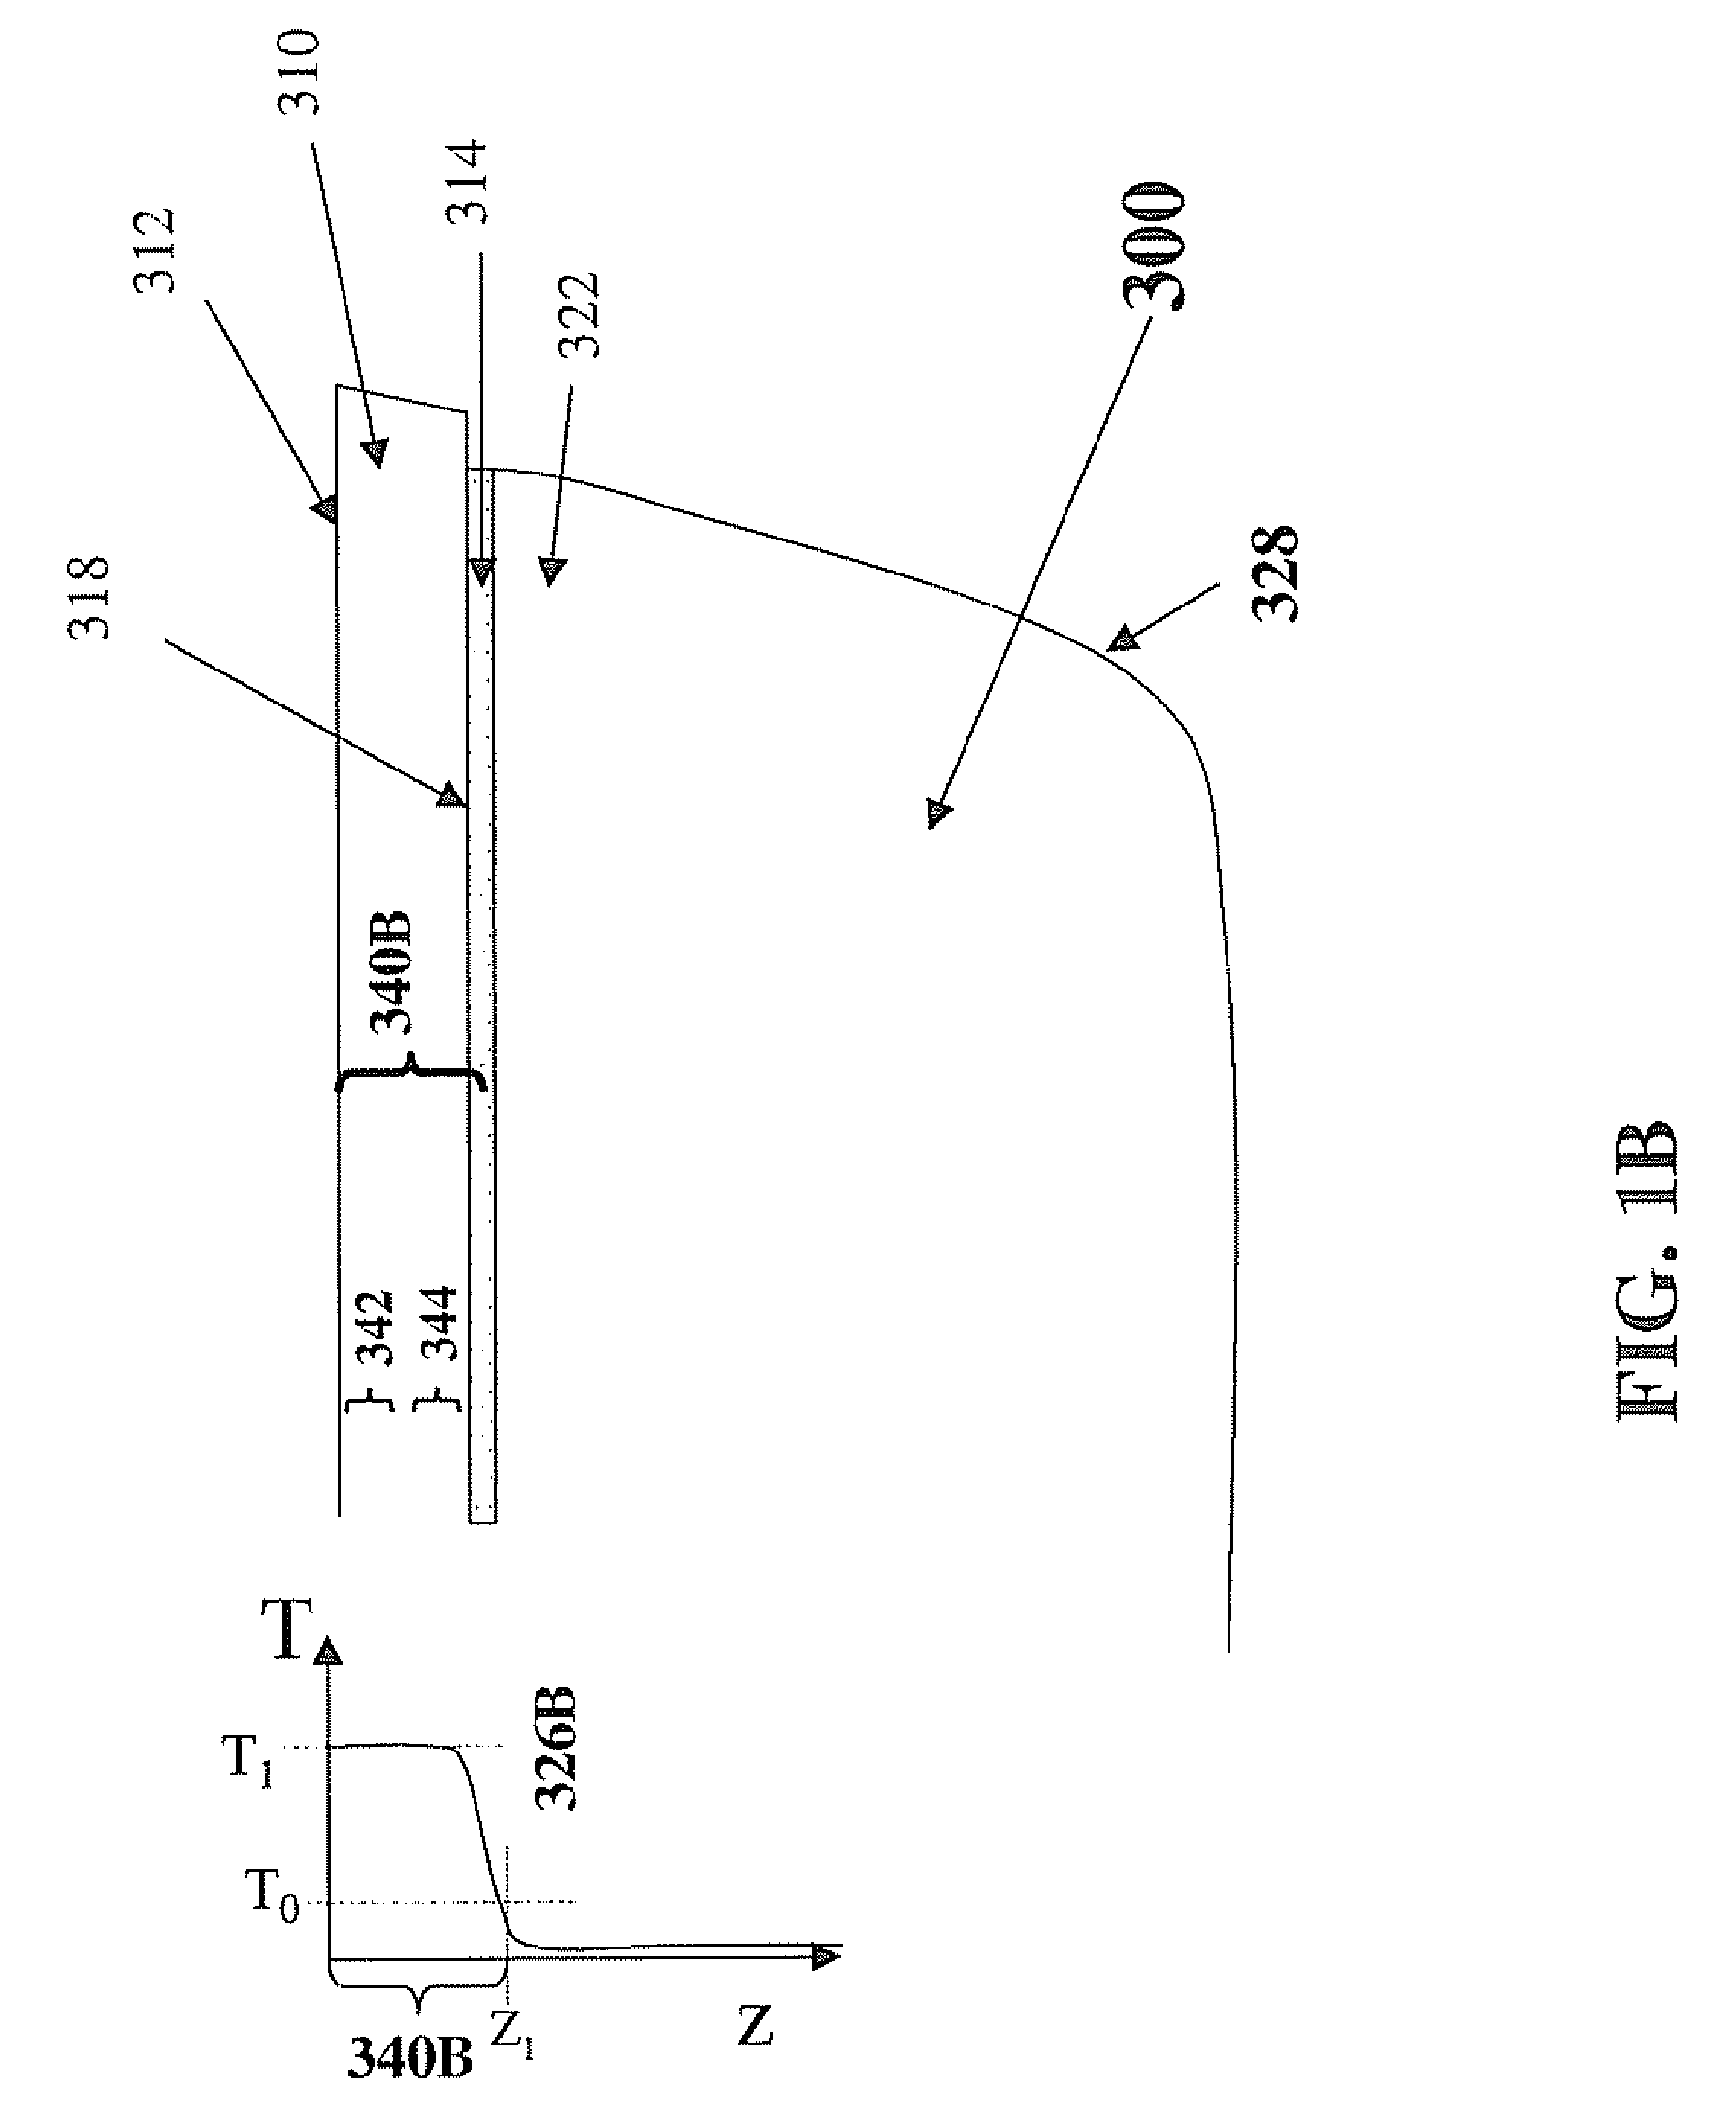 Method And Apparatus For Treating A Fungal Nail Infection With Shortwave And/Or Microwave Radiation